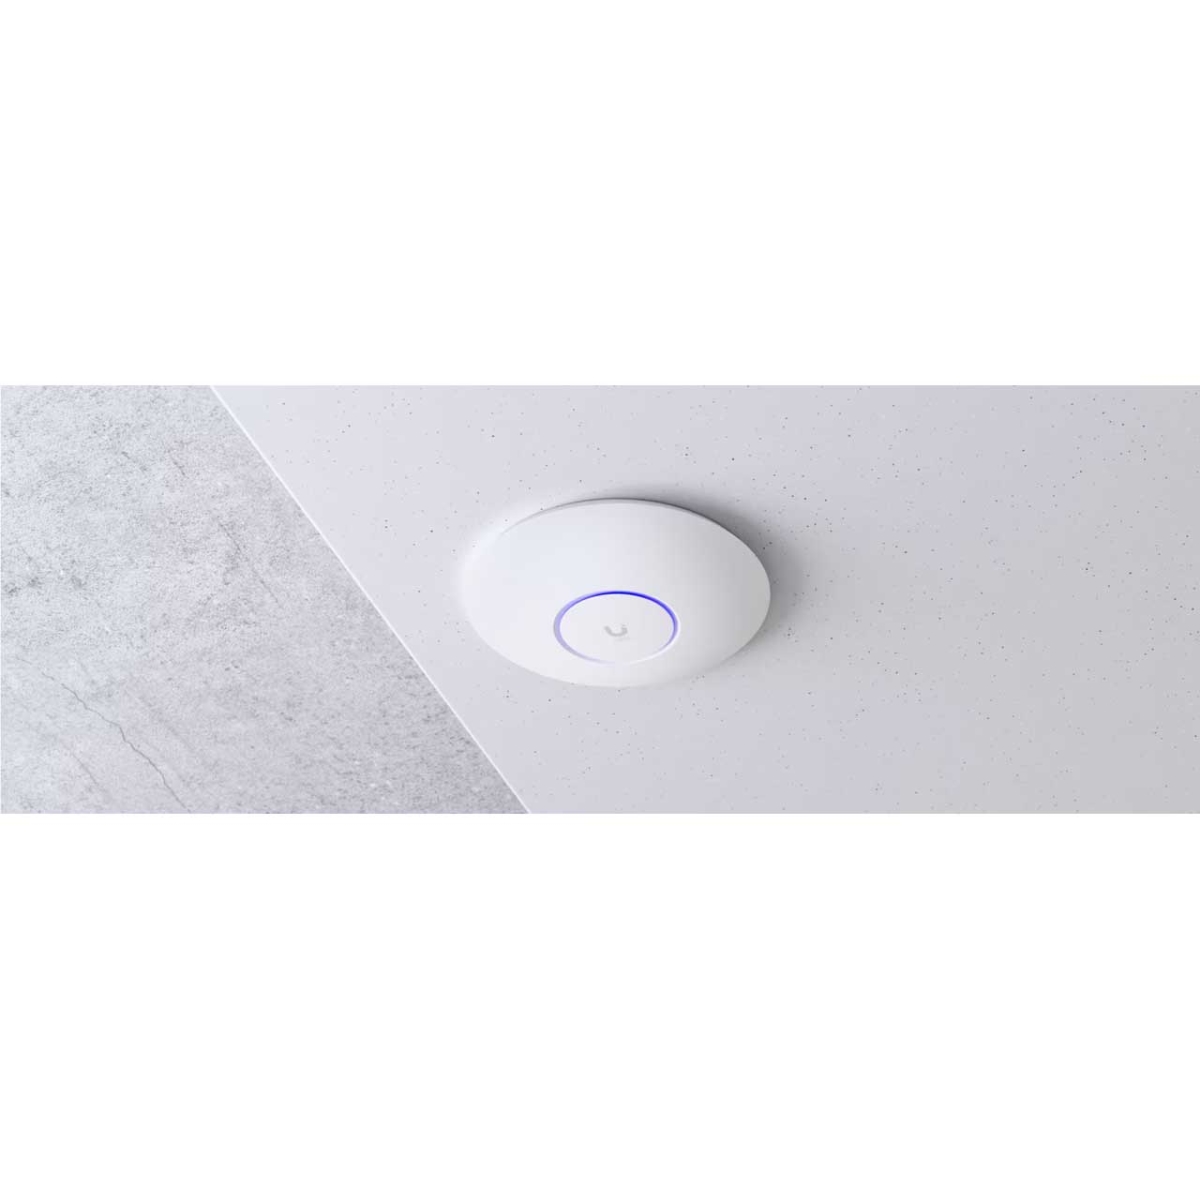 Picture of Ubiquiti Networks UBI-U6-LR-US 6 802.11ax 2.93 Gbit-s Wireless Access Point - 2.40 GHz-5 GHz - MIMO Technology - Wall-Ceiling Mountable